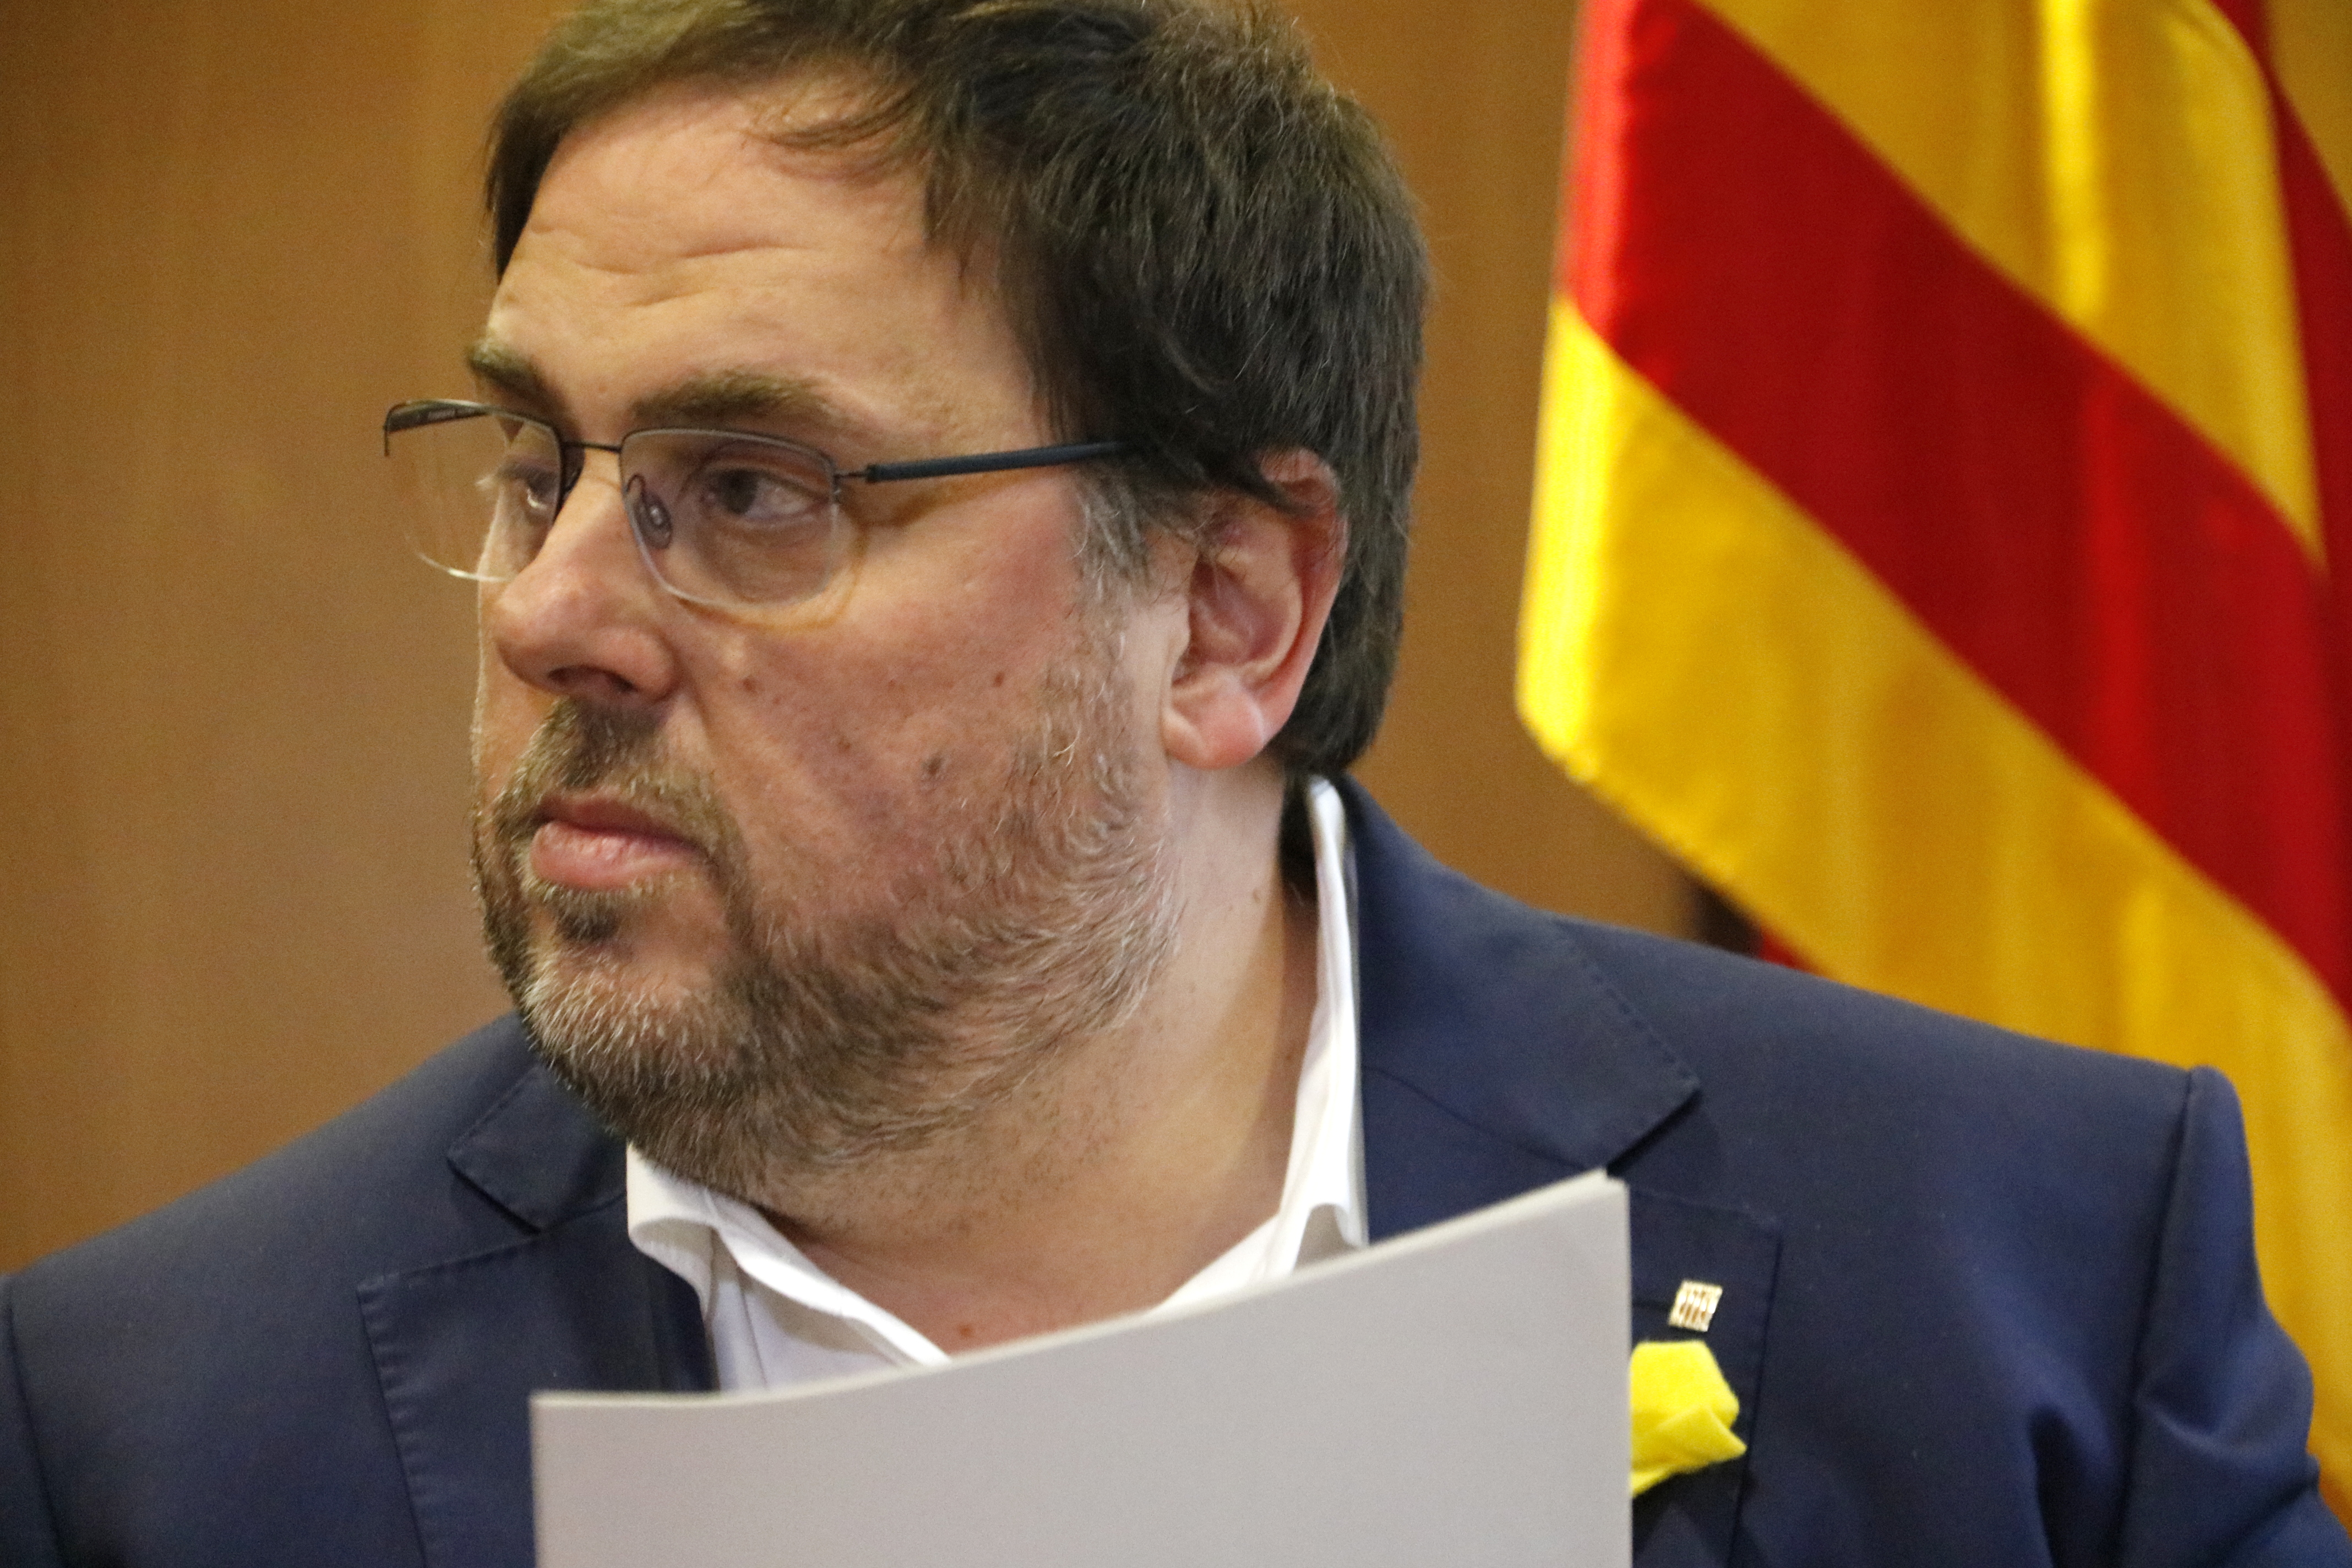 Deposed vice president Oriol Junqueras on October 31 (by ACN)